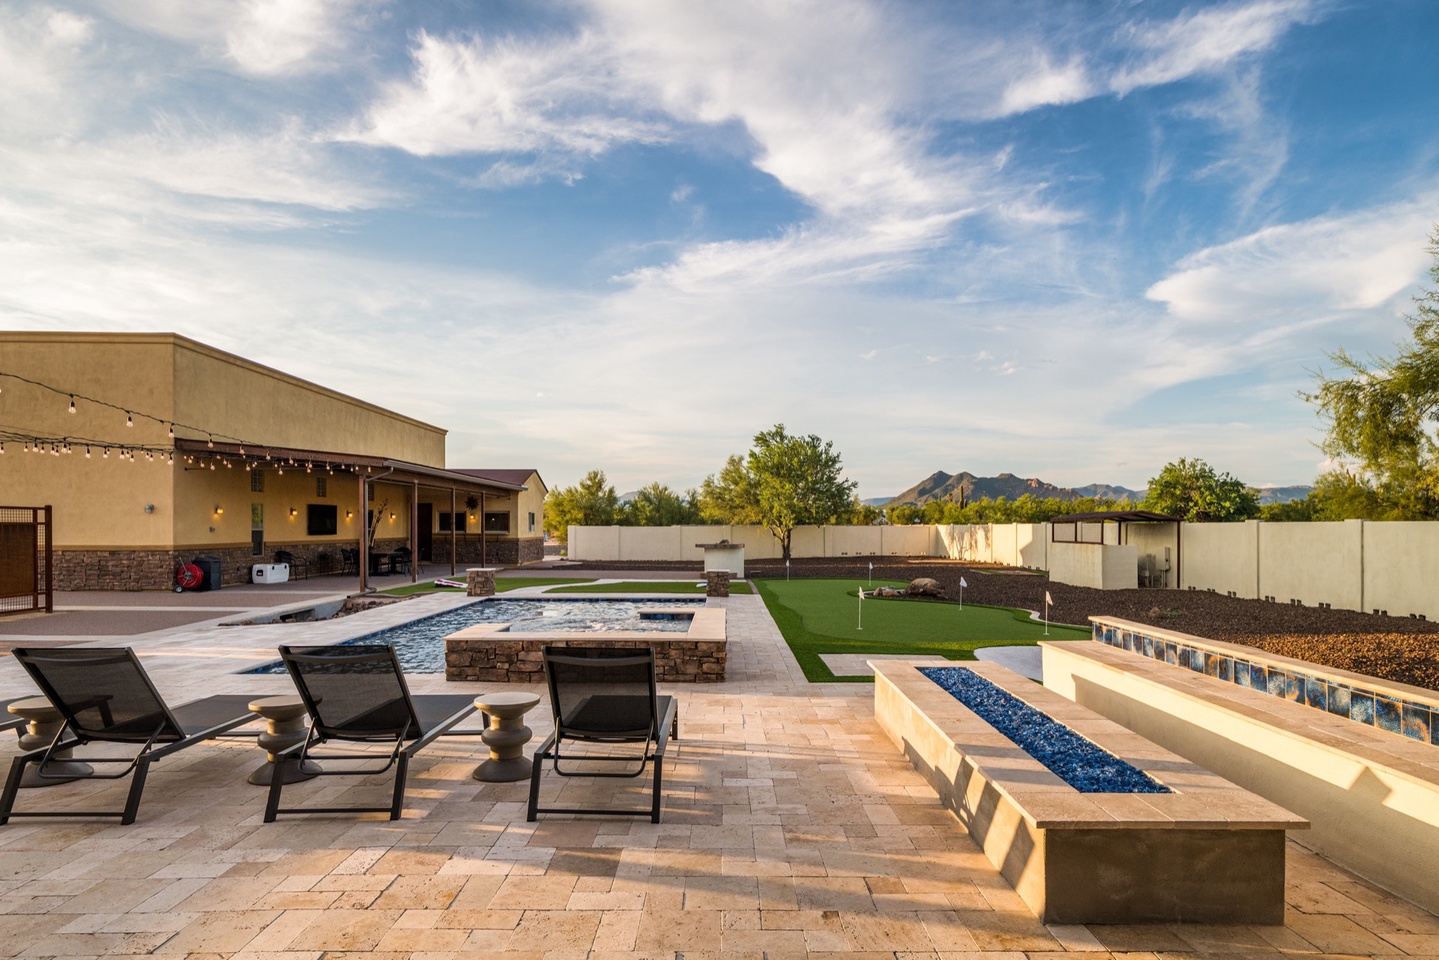 Enjoy the yard with views of Black Mountain